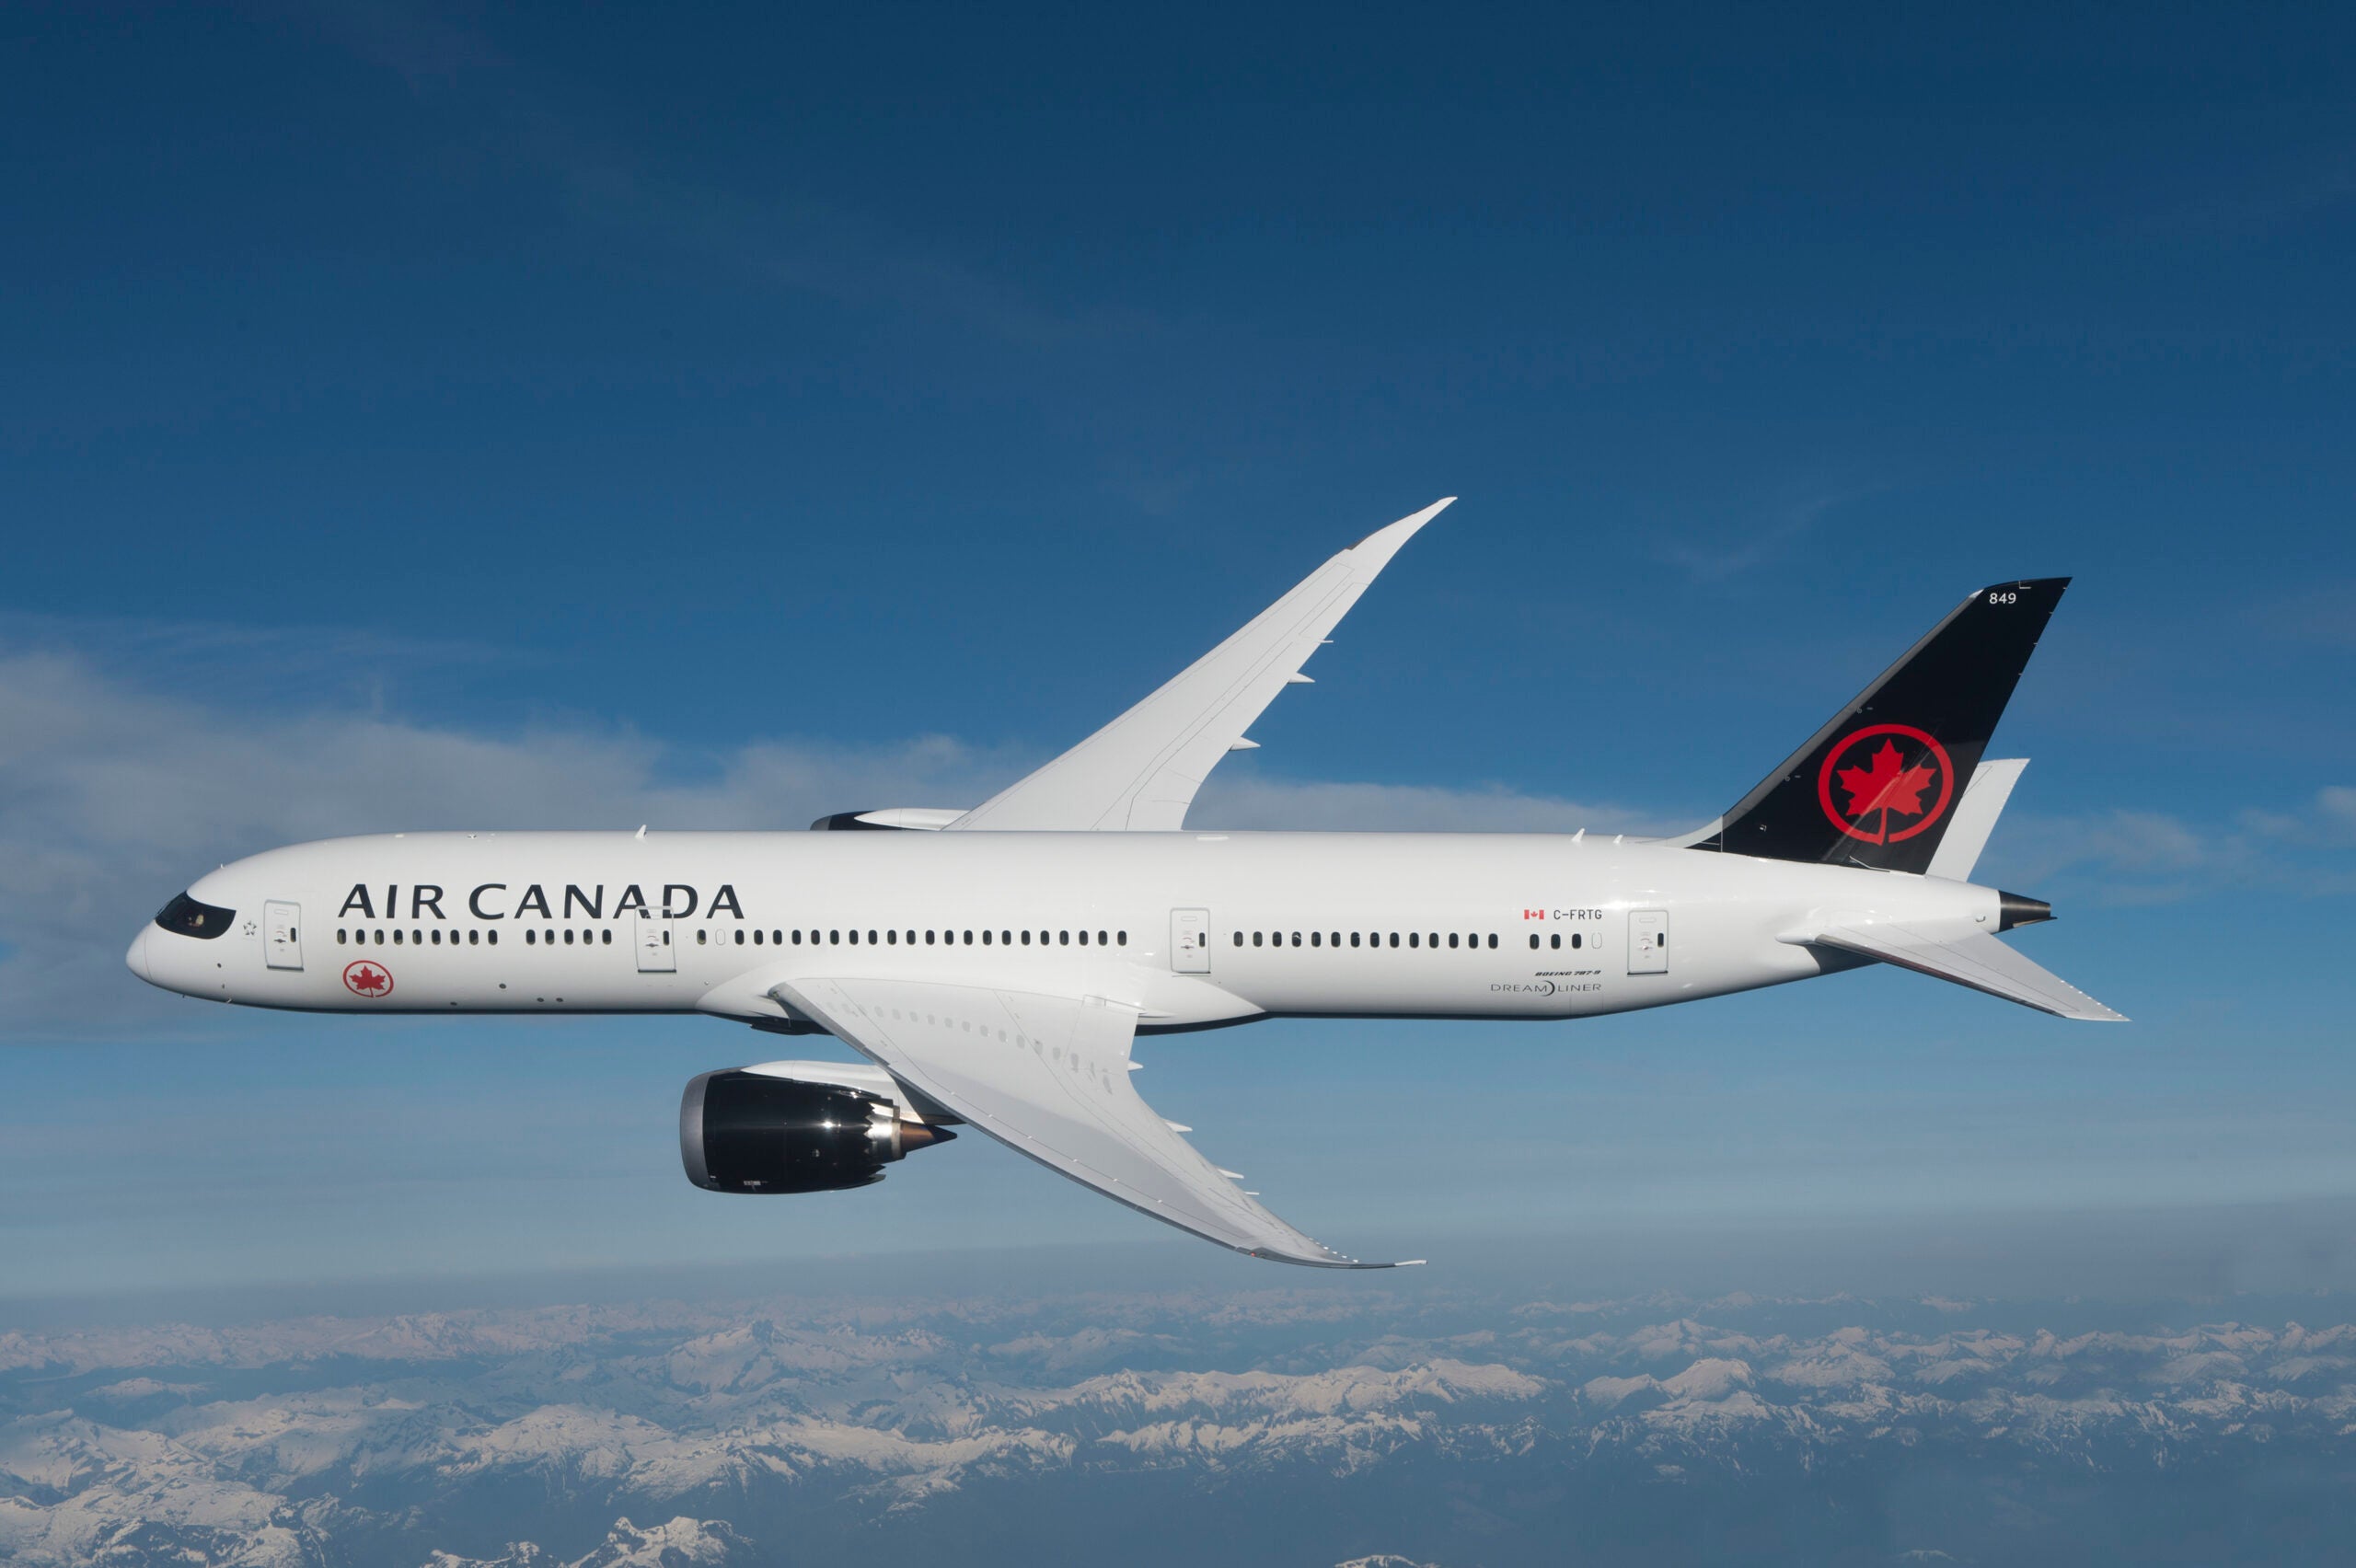 Guide at this time: Air Canada is providing 20-25% off fares in Canada and the US on Cyber ​​Monday